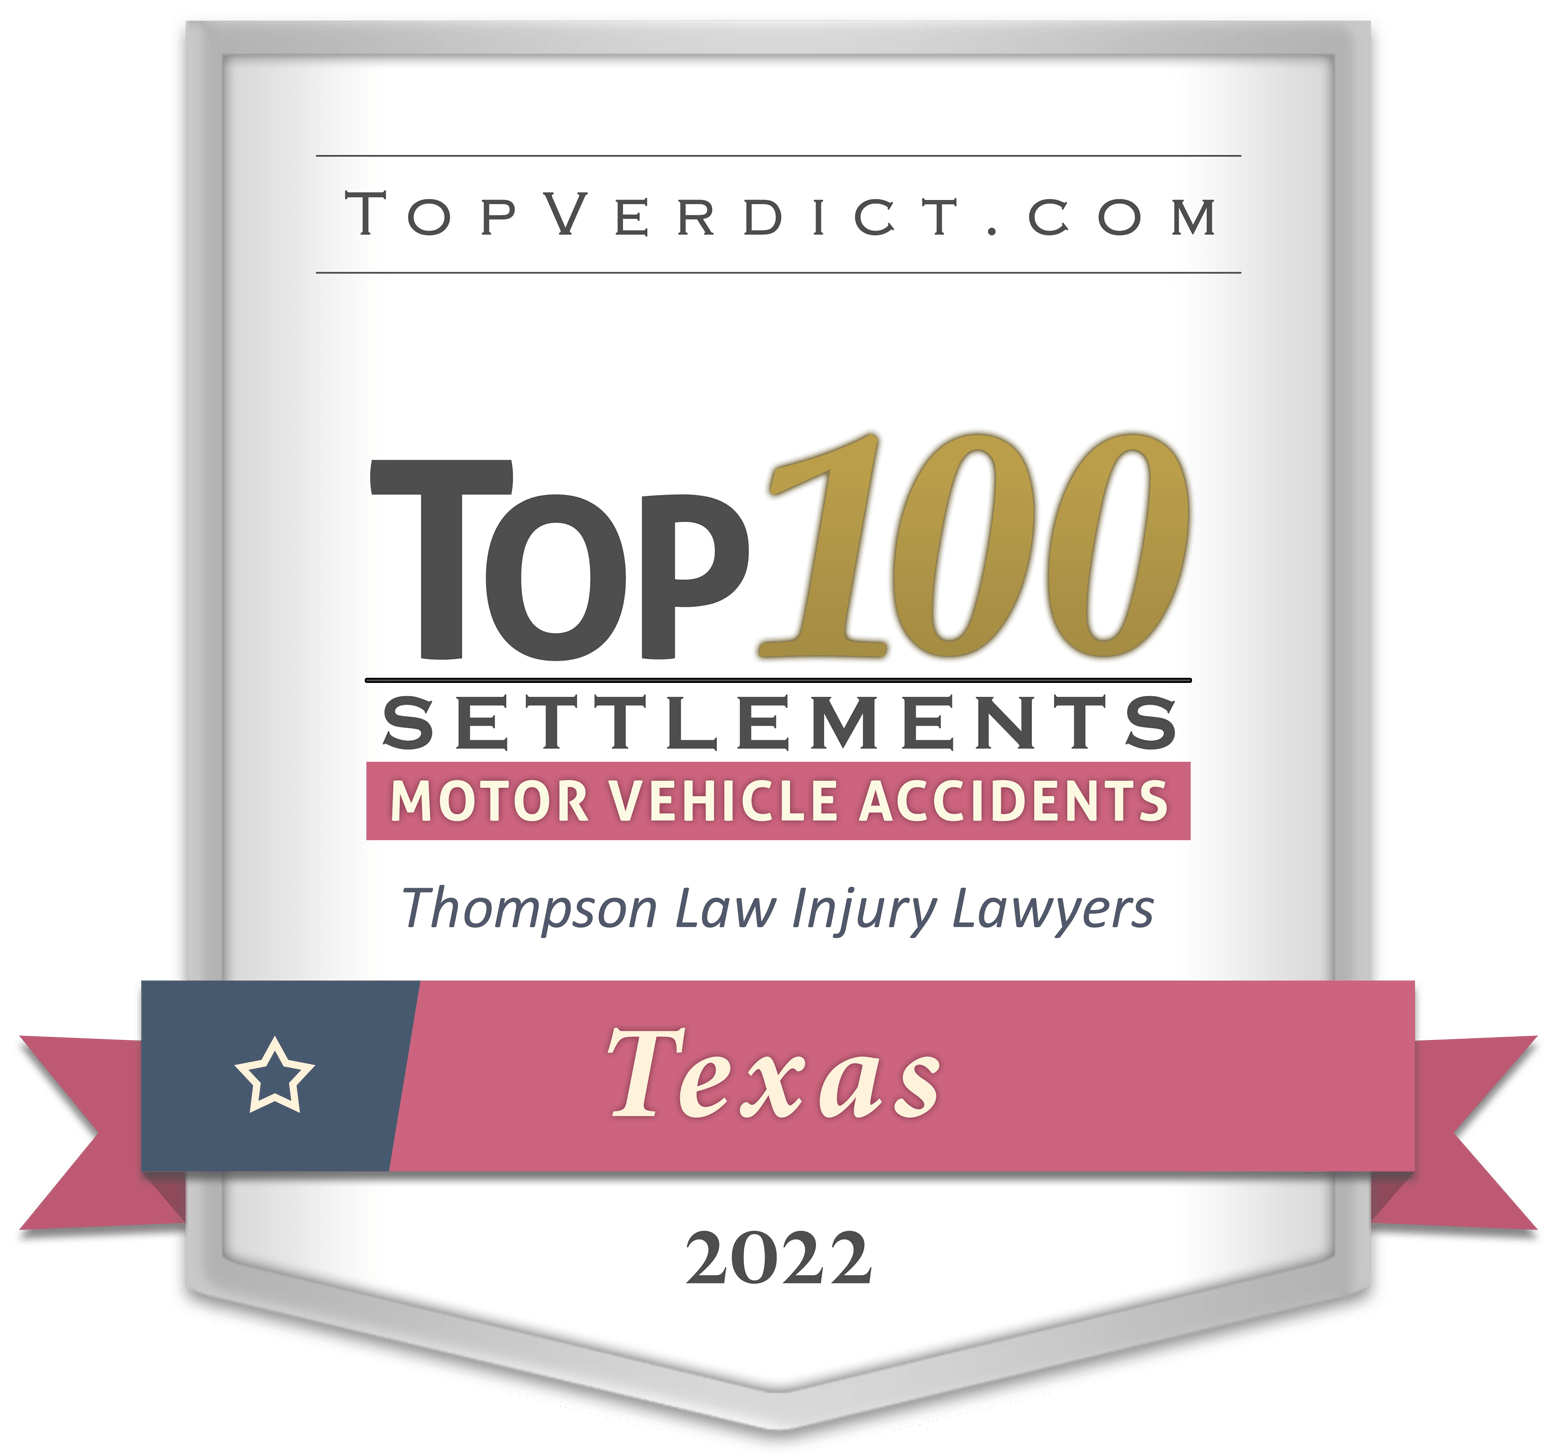 TopVerdict Top 100 motor vehicle accident settlements in Texas 2022 badge - Sugar Land Wrongful Death Lawyers